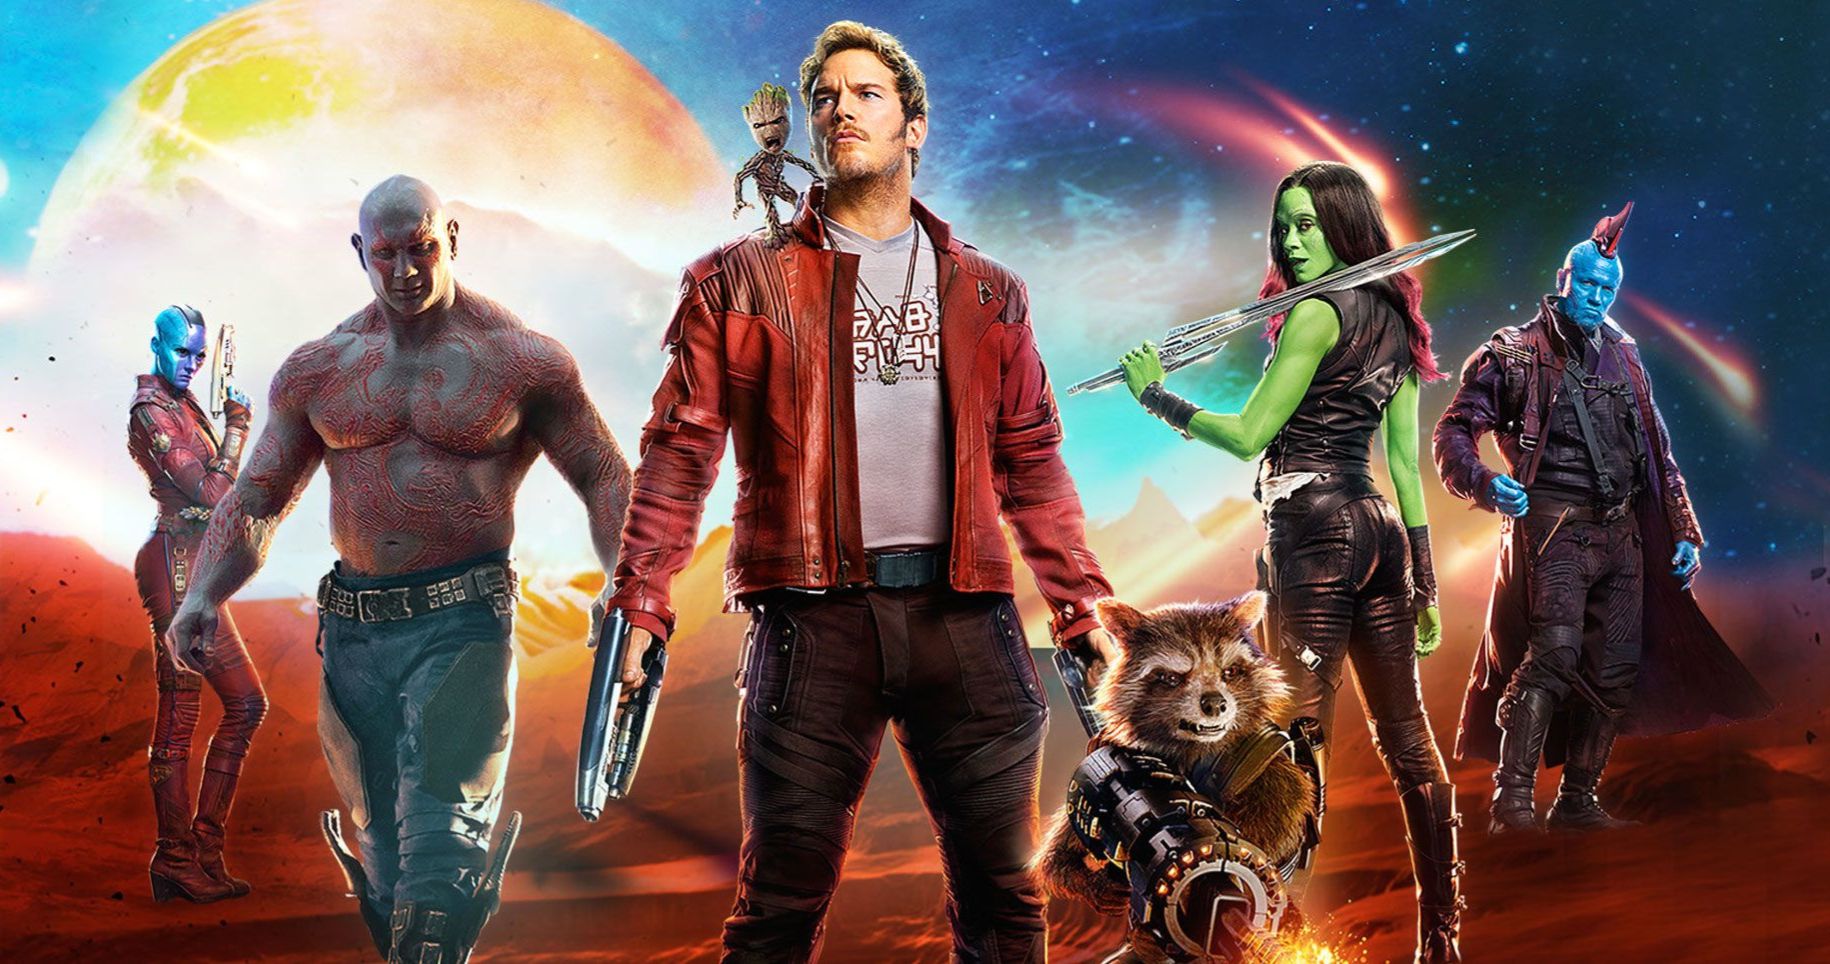 James Gunn Confirms Guardians of the Galaxy Vol. 3 Has Not Been Delayed